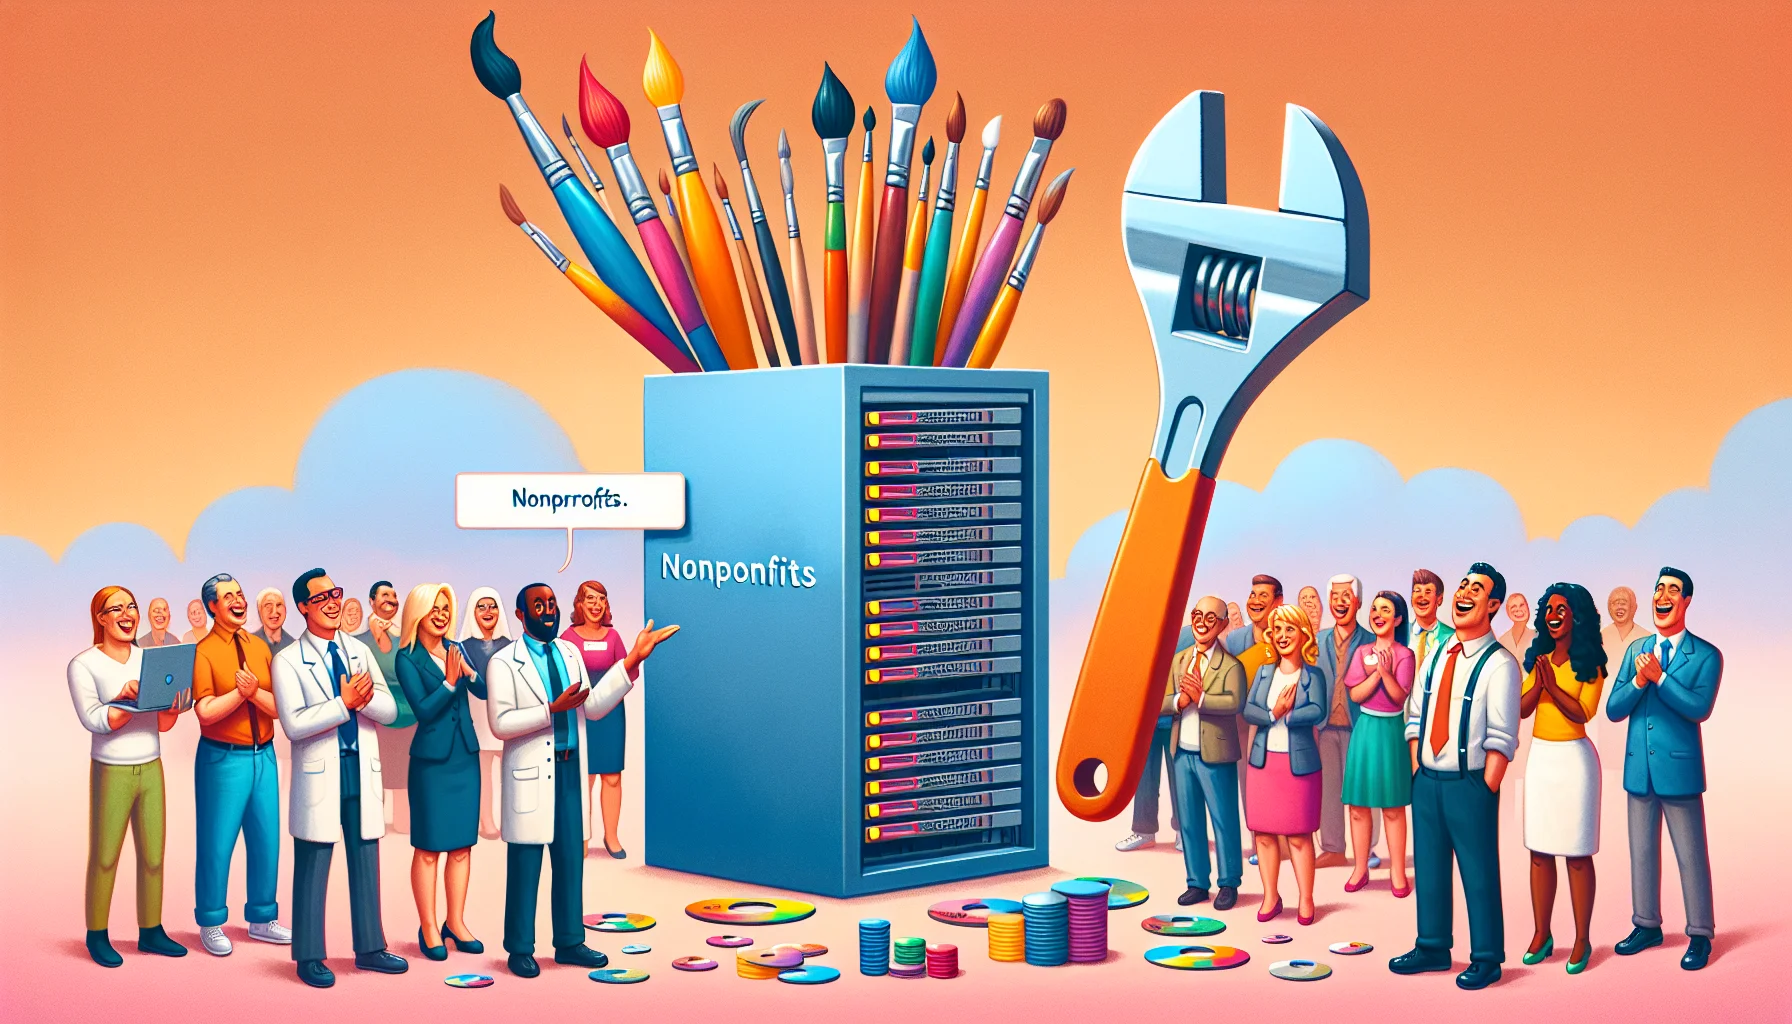 Create a humorous scenario featuring a website builder for nonprofits. Portray this in a realistic style. Show fun metaphorical tools like a vibrant colored paintbrush creating the pages and a massive wrench adjusting the settings. Include charming, cartoony server racks enthusiastically supplying web hosting, with visible, friendly safety measures inplace to display how secure the hosting is. The background can be a soft, inviting gradient to give off a welcoming vibe. Please incorporate a diverse range of human characters representing nonprofits from different professions, with a balanced mix of genders and different descents such as South Asian, Hispanic, and Middle Eastern.